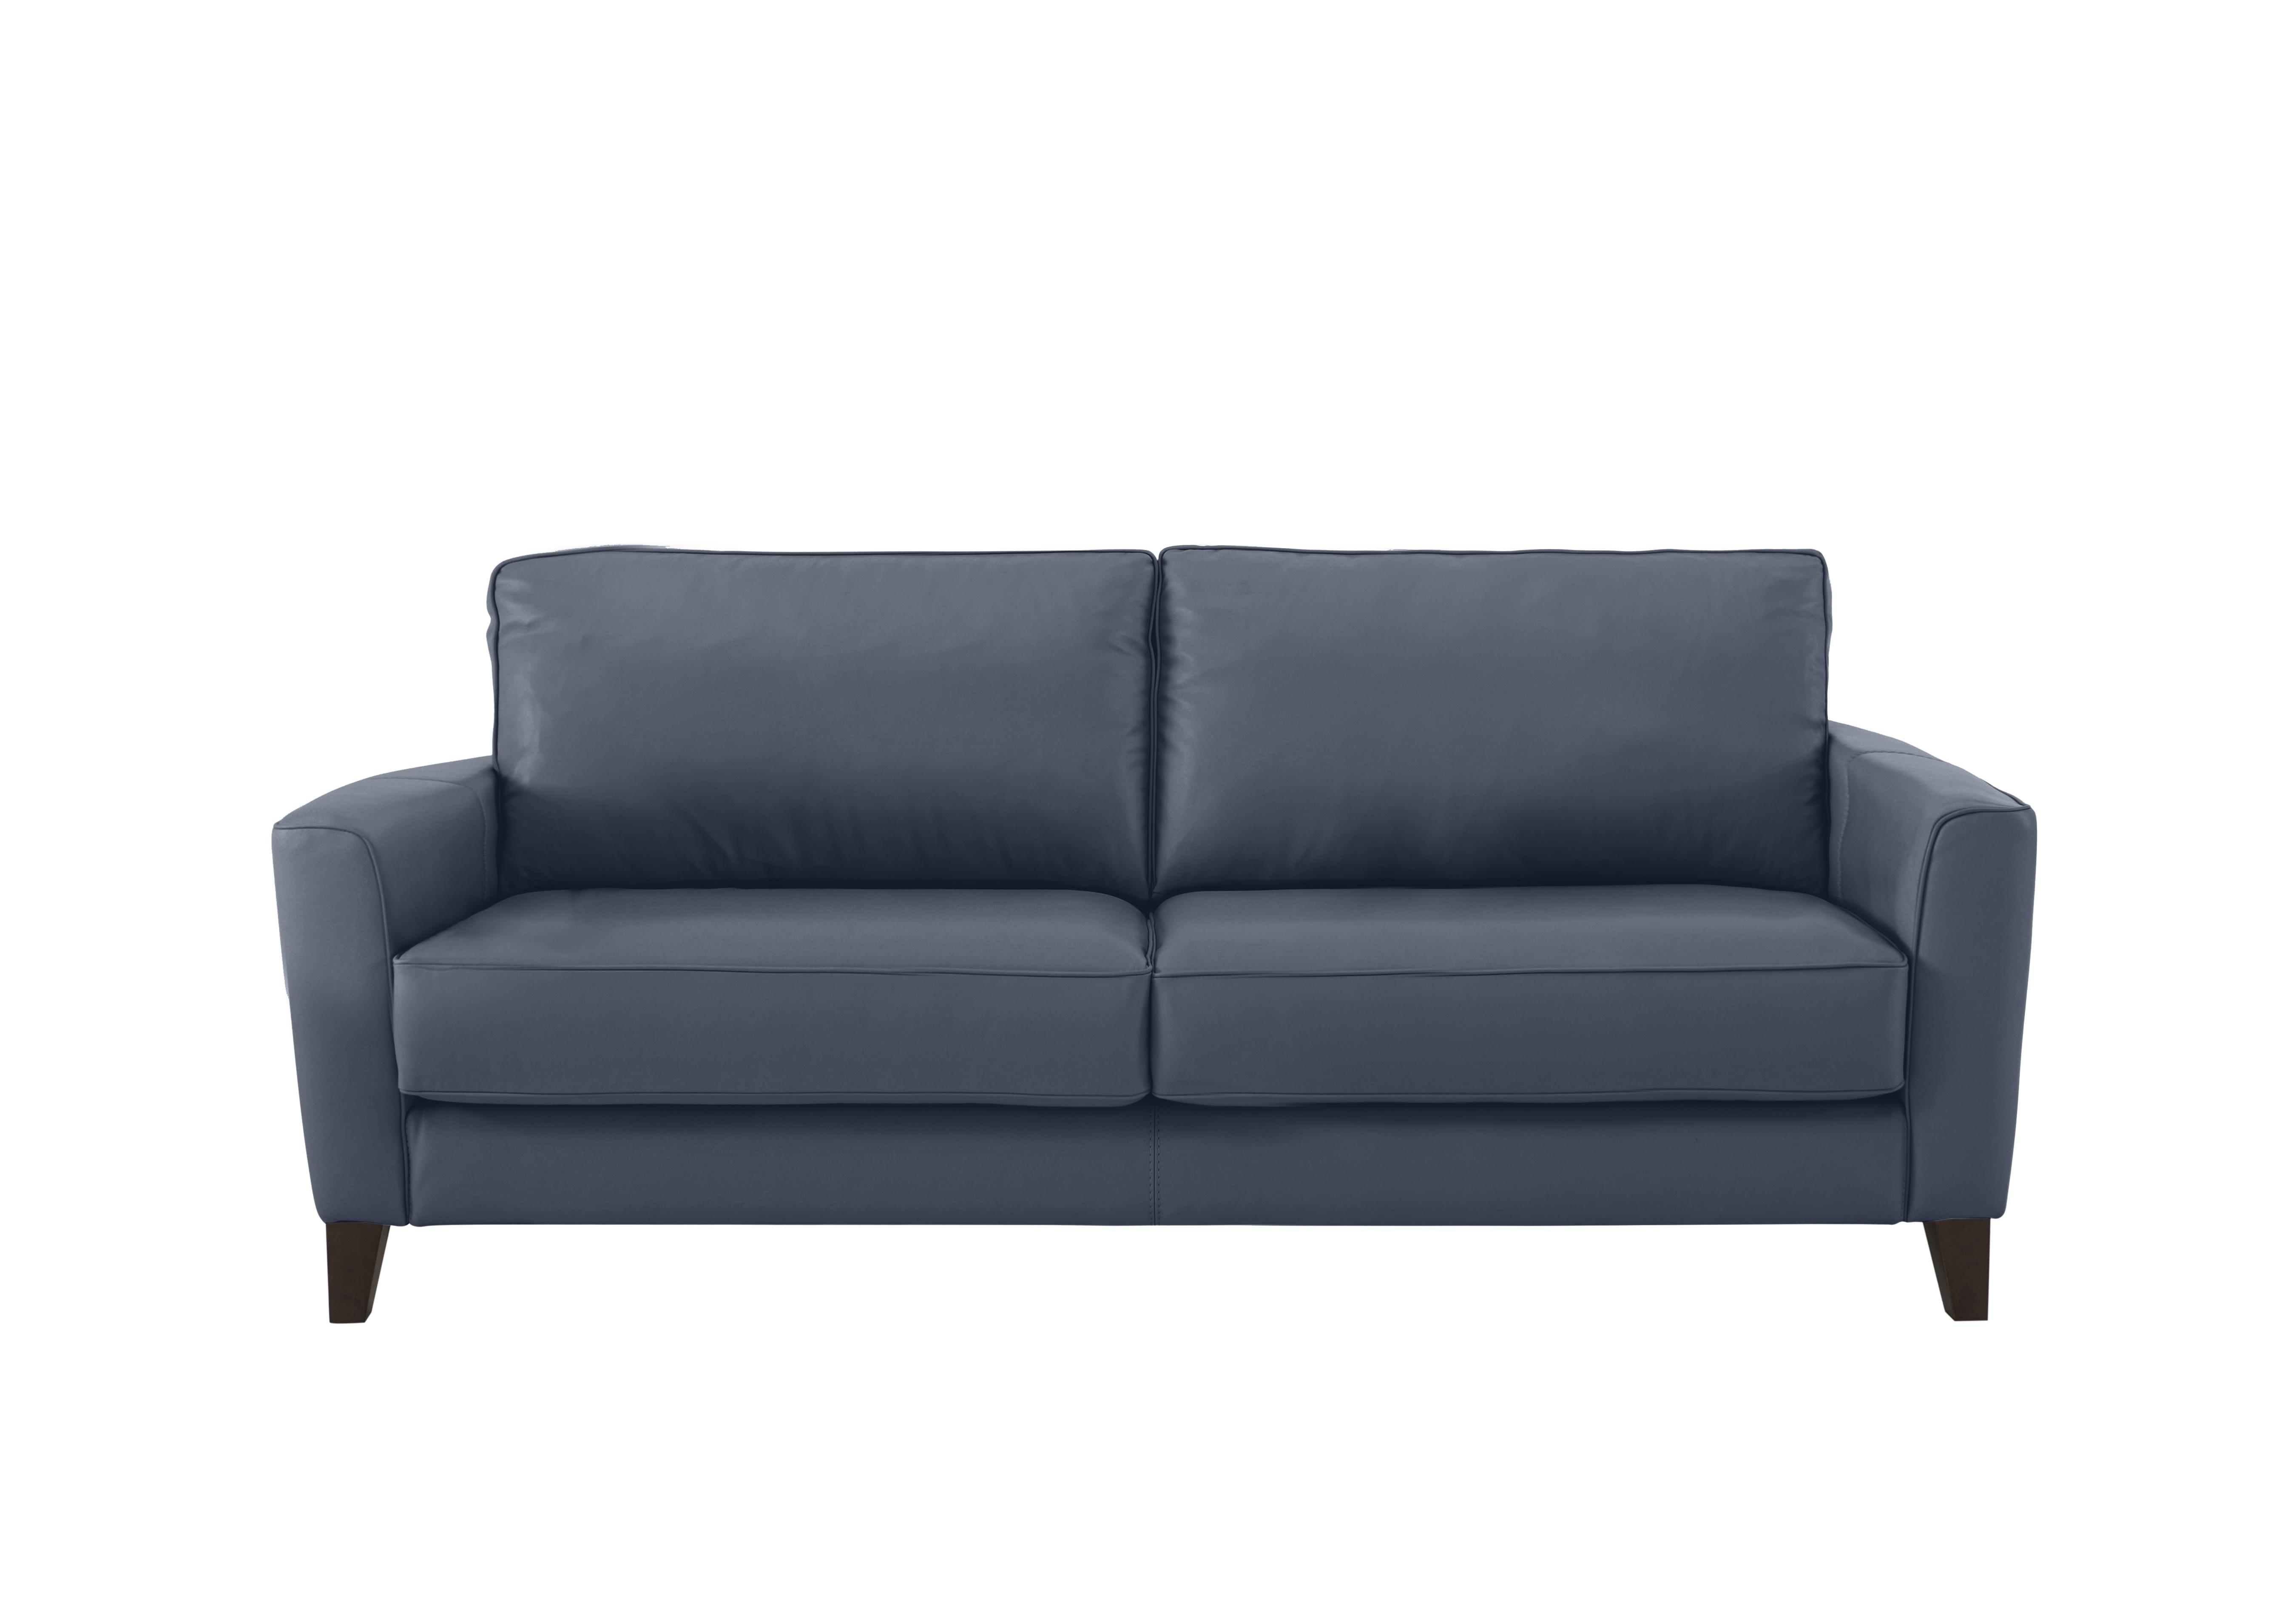 Brondby 3 Seater Leather Sofa in Bv-313e Ocean Blue on Furniture Village